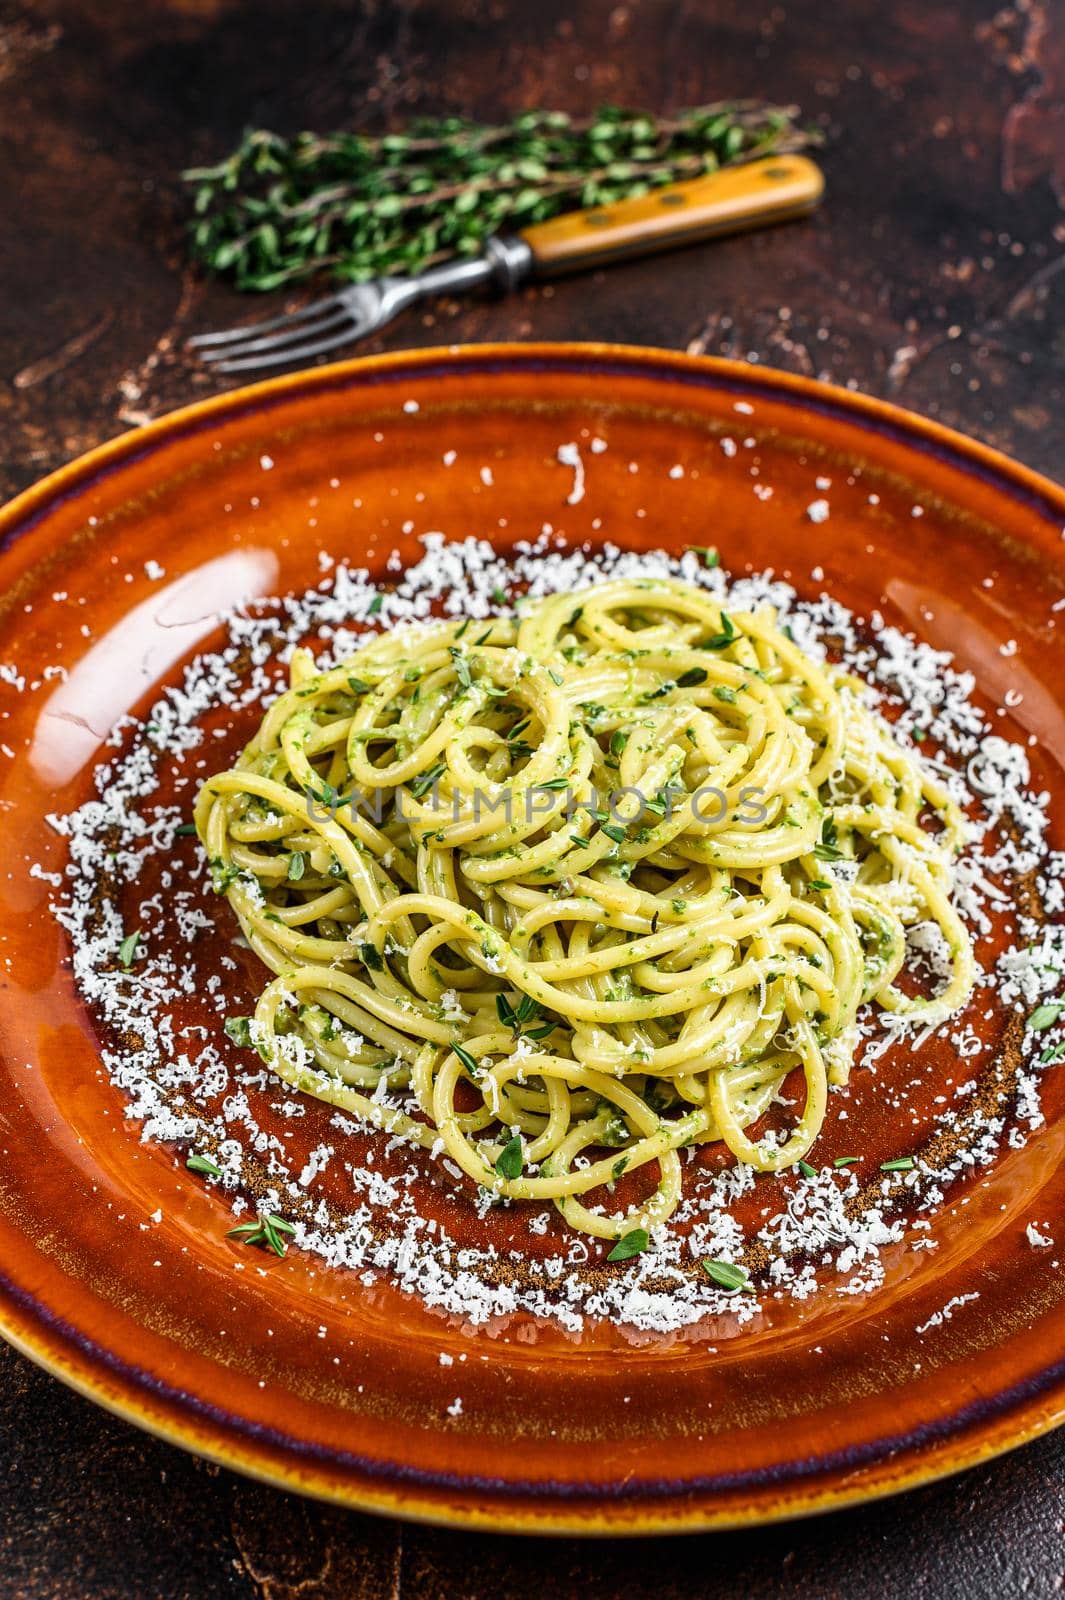 Spinach Spaghetti Pasta with pesto sauce and parmesan. Dark background. Top view by Composter